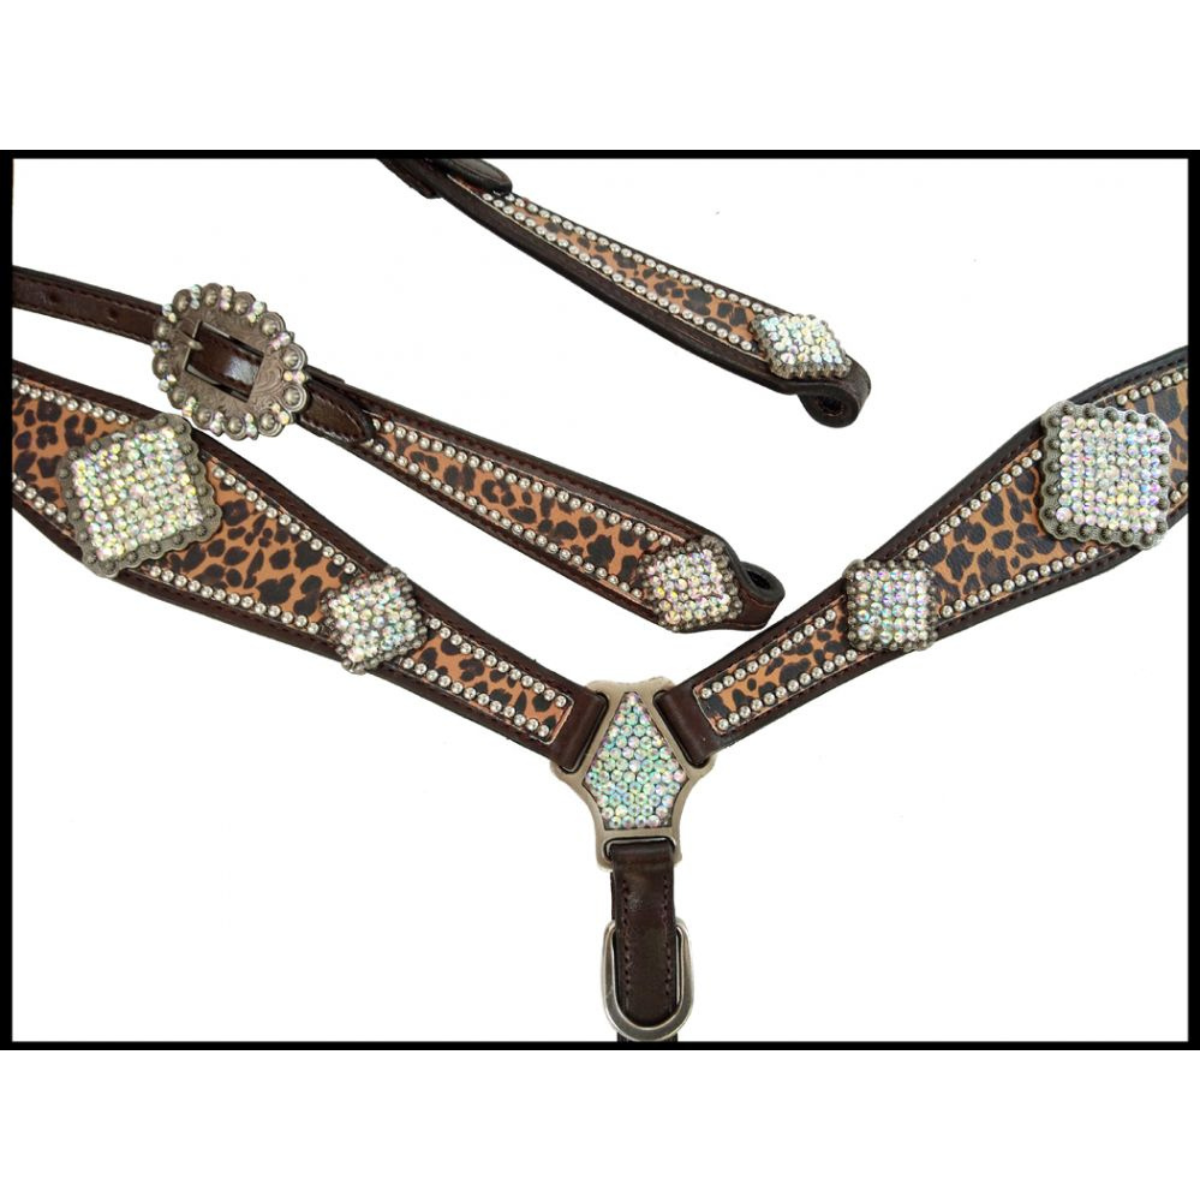 Showman ® Cheetah print one ear headstall and breast collar set with rhinestone accents. - Double T Saddles